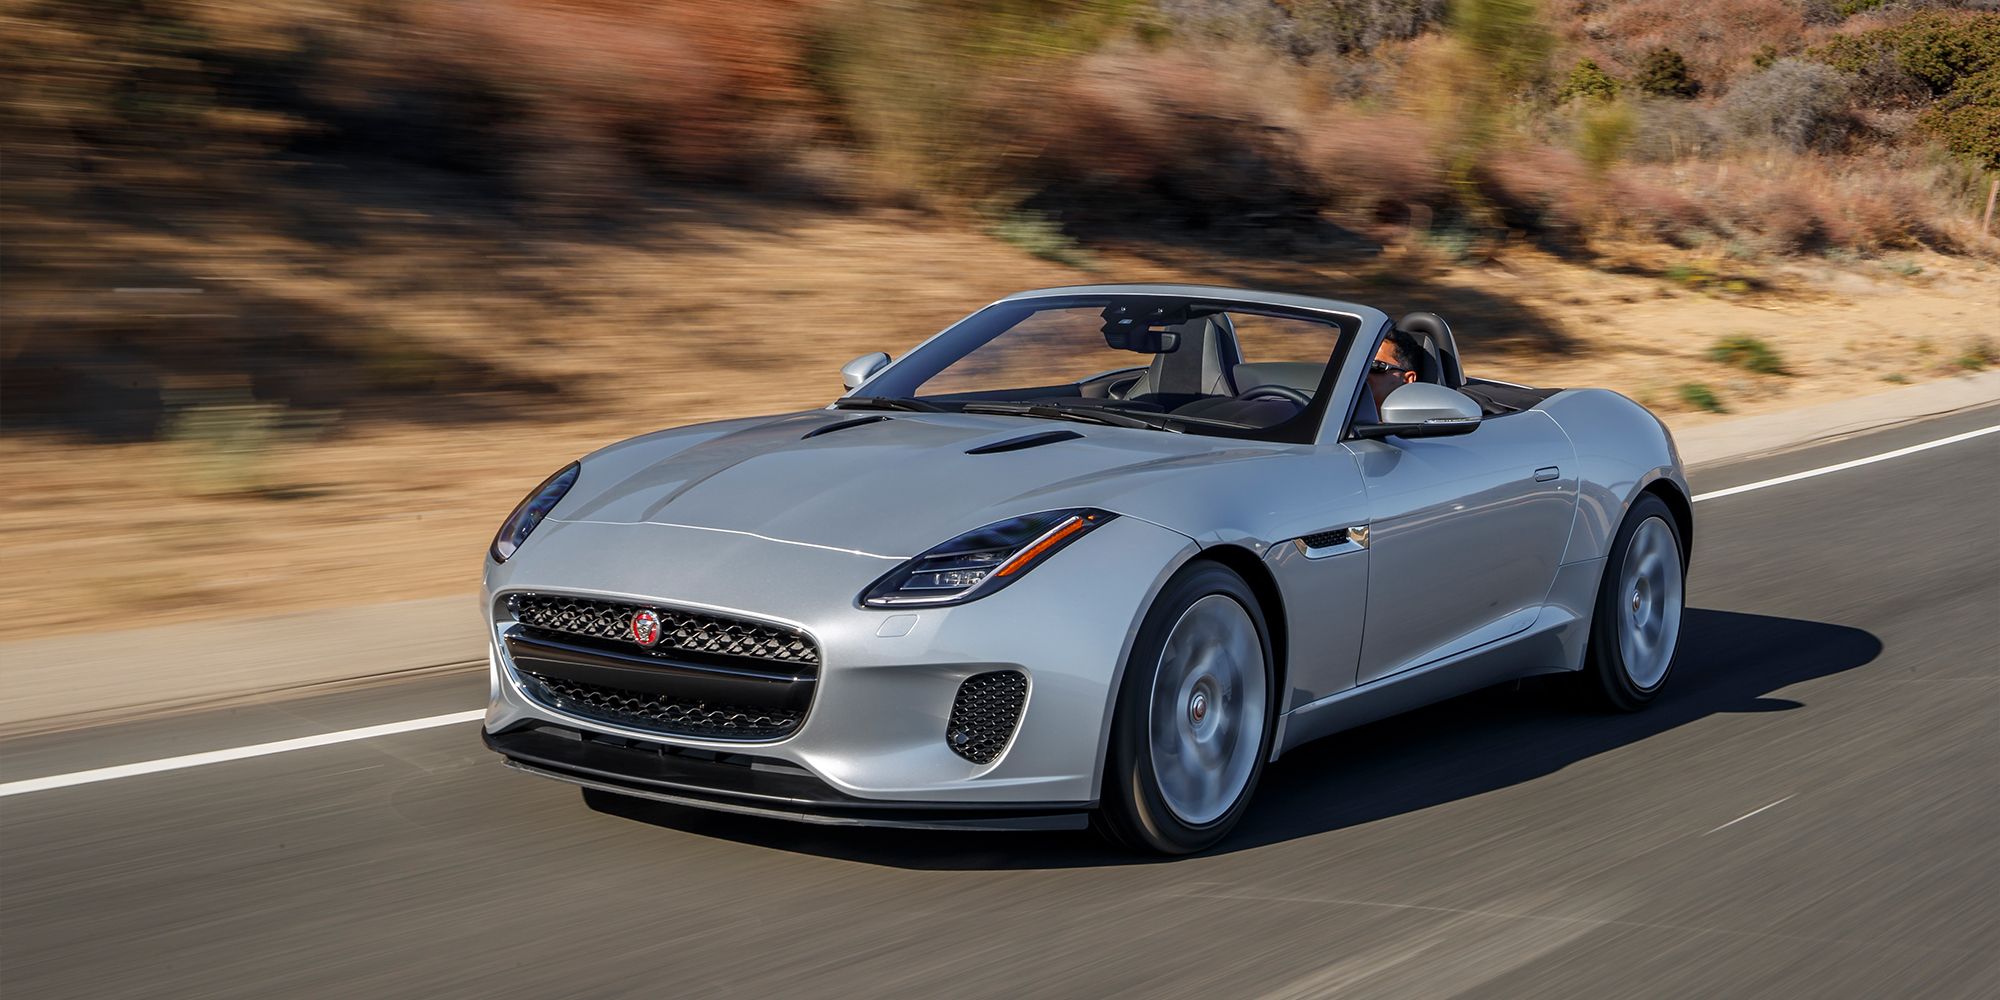 The front of the F-Type four-cylinder on the move